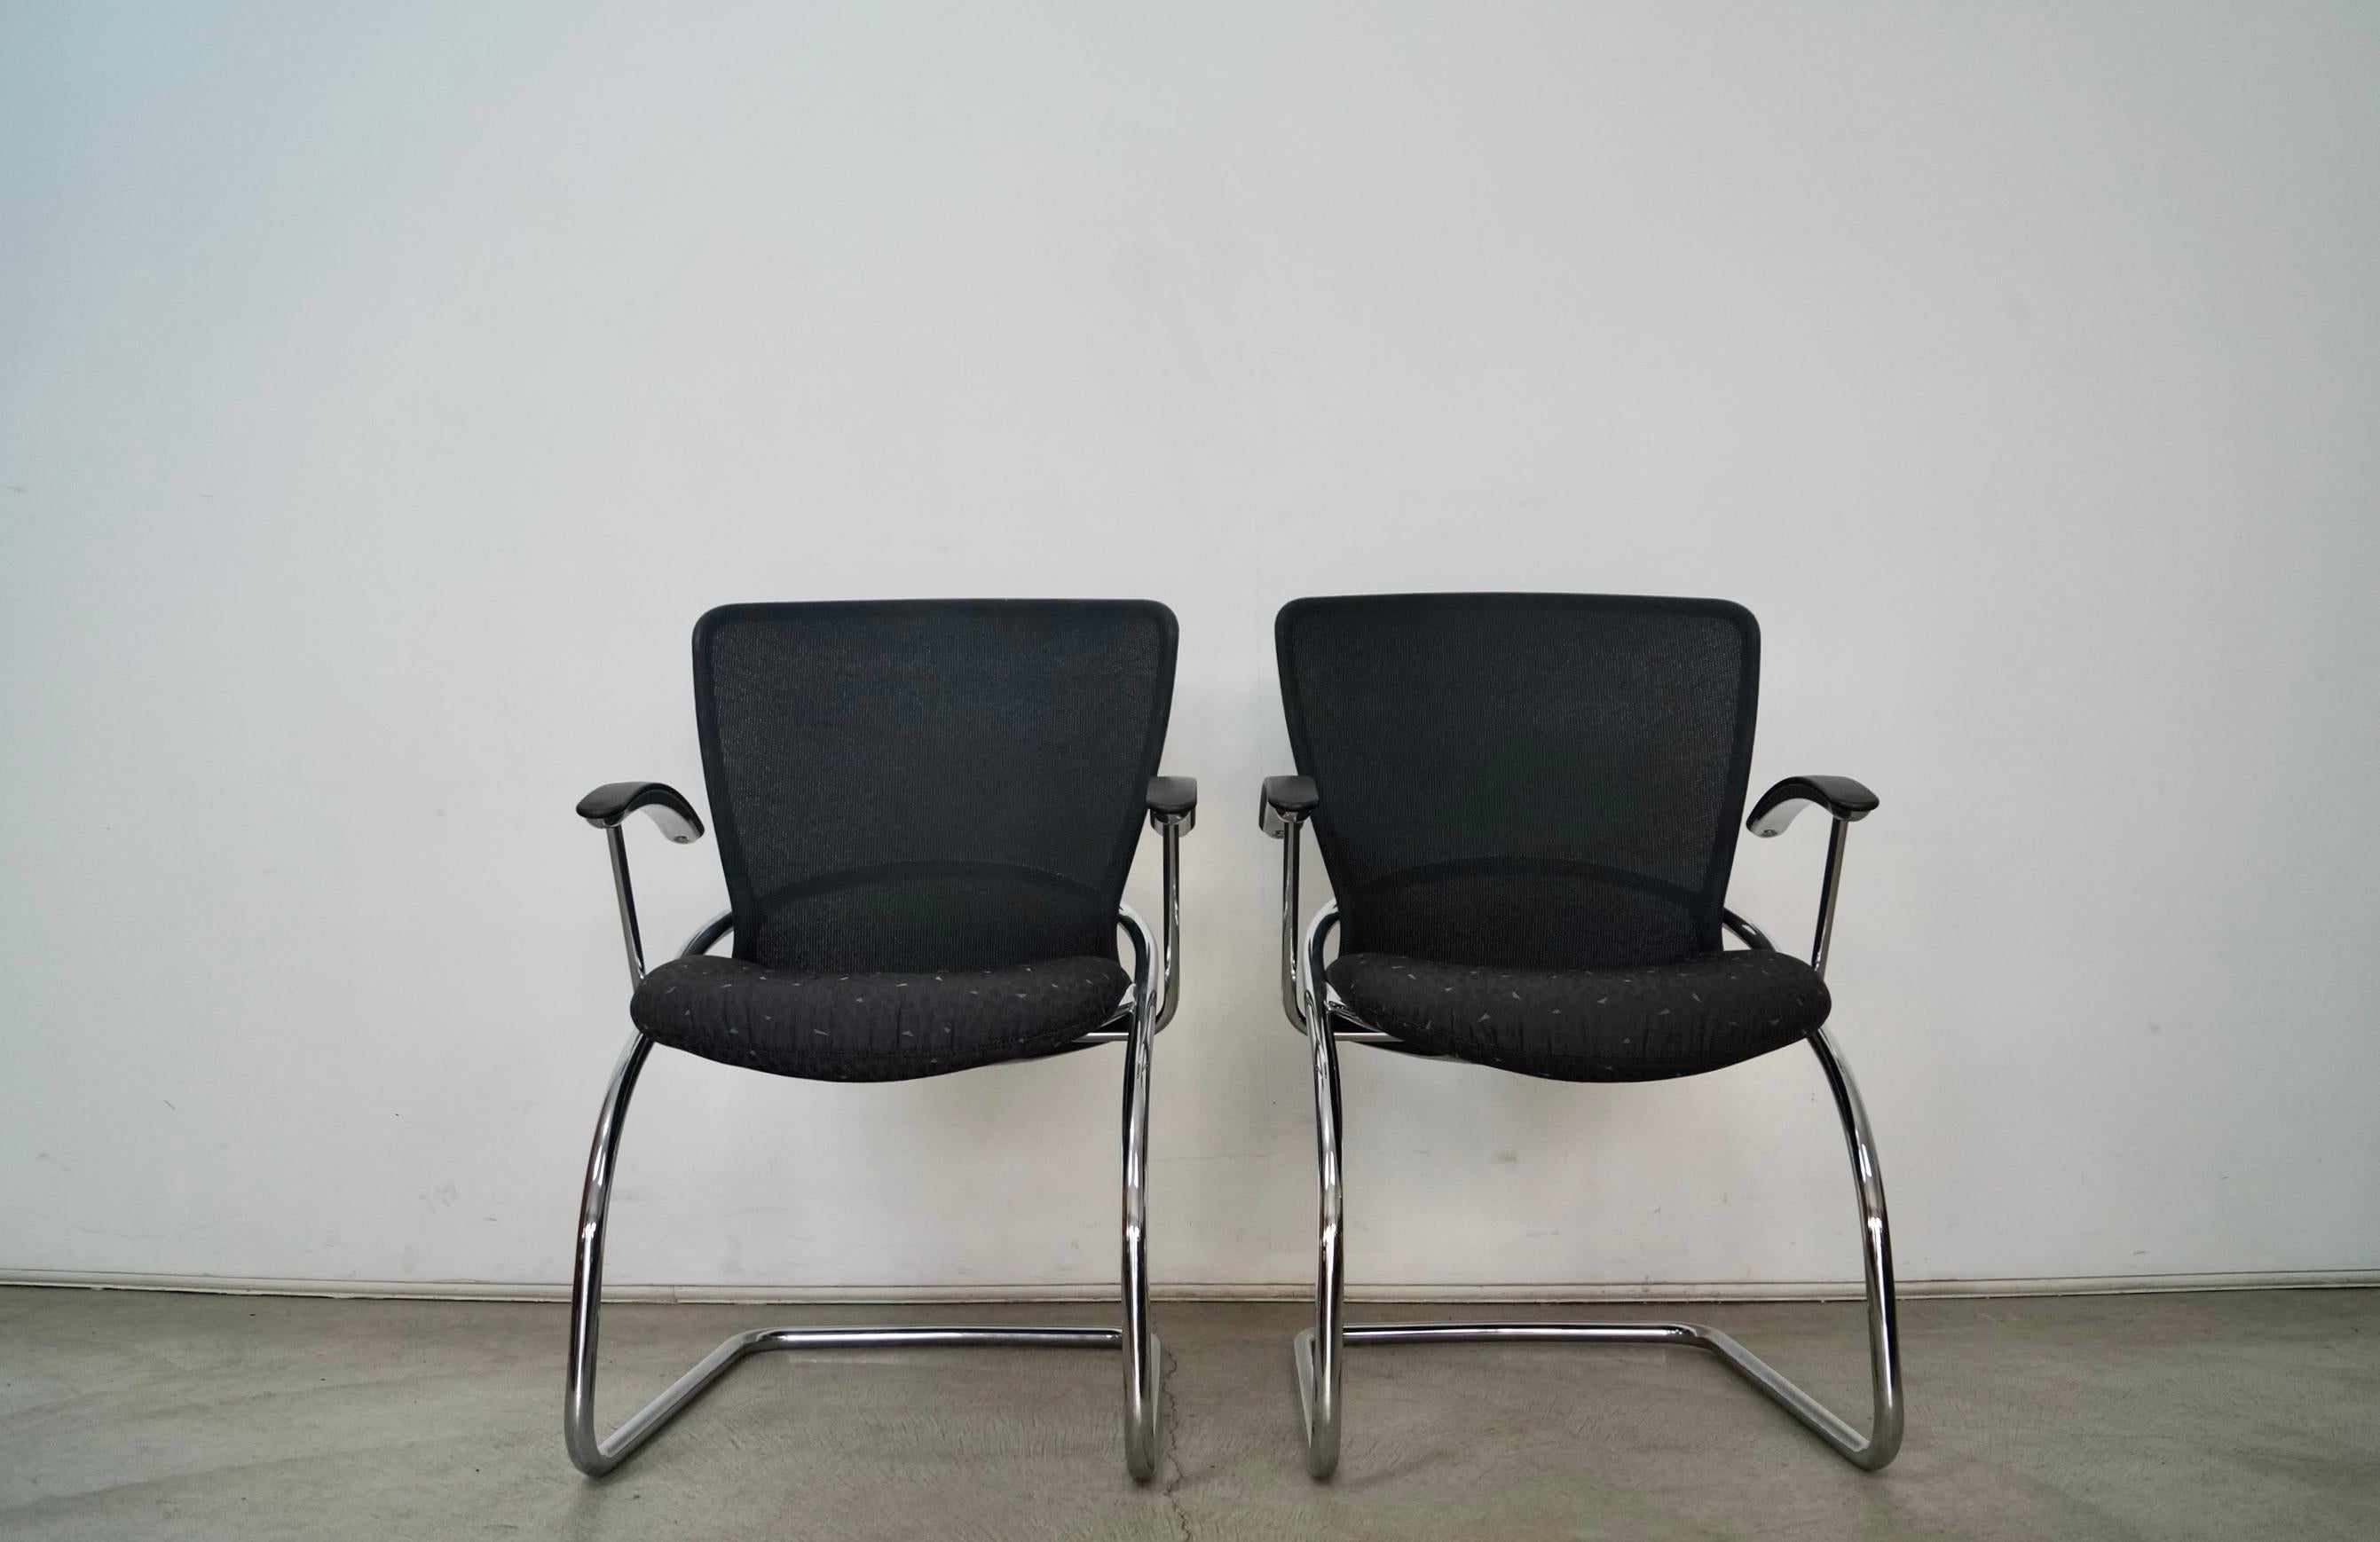 Vintage Postmodern pair of armchairs for sale. These were manufactured by design company Konig + Neurath in 1999, and are the Diva chairs. They were made in Germany, and have a Bauhaus flare. They are in excellent condition, and have a Herman Miller